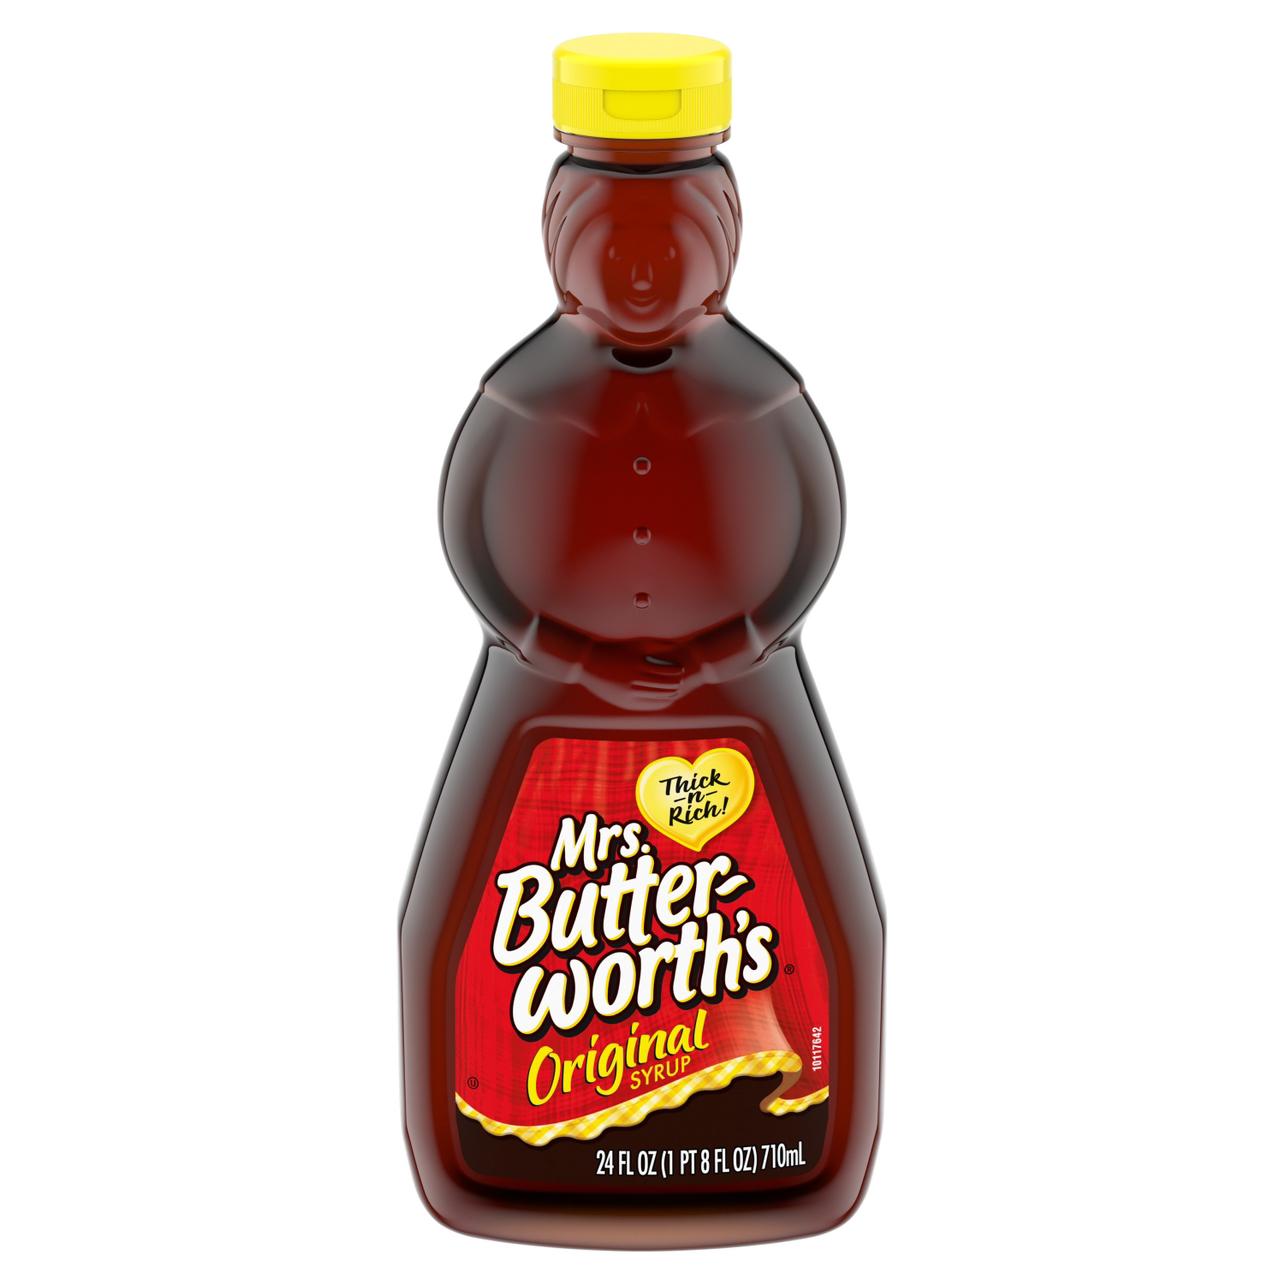 Mrs Butterworth's images